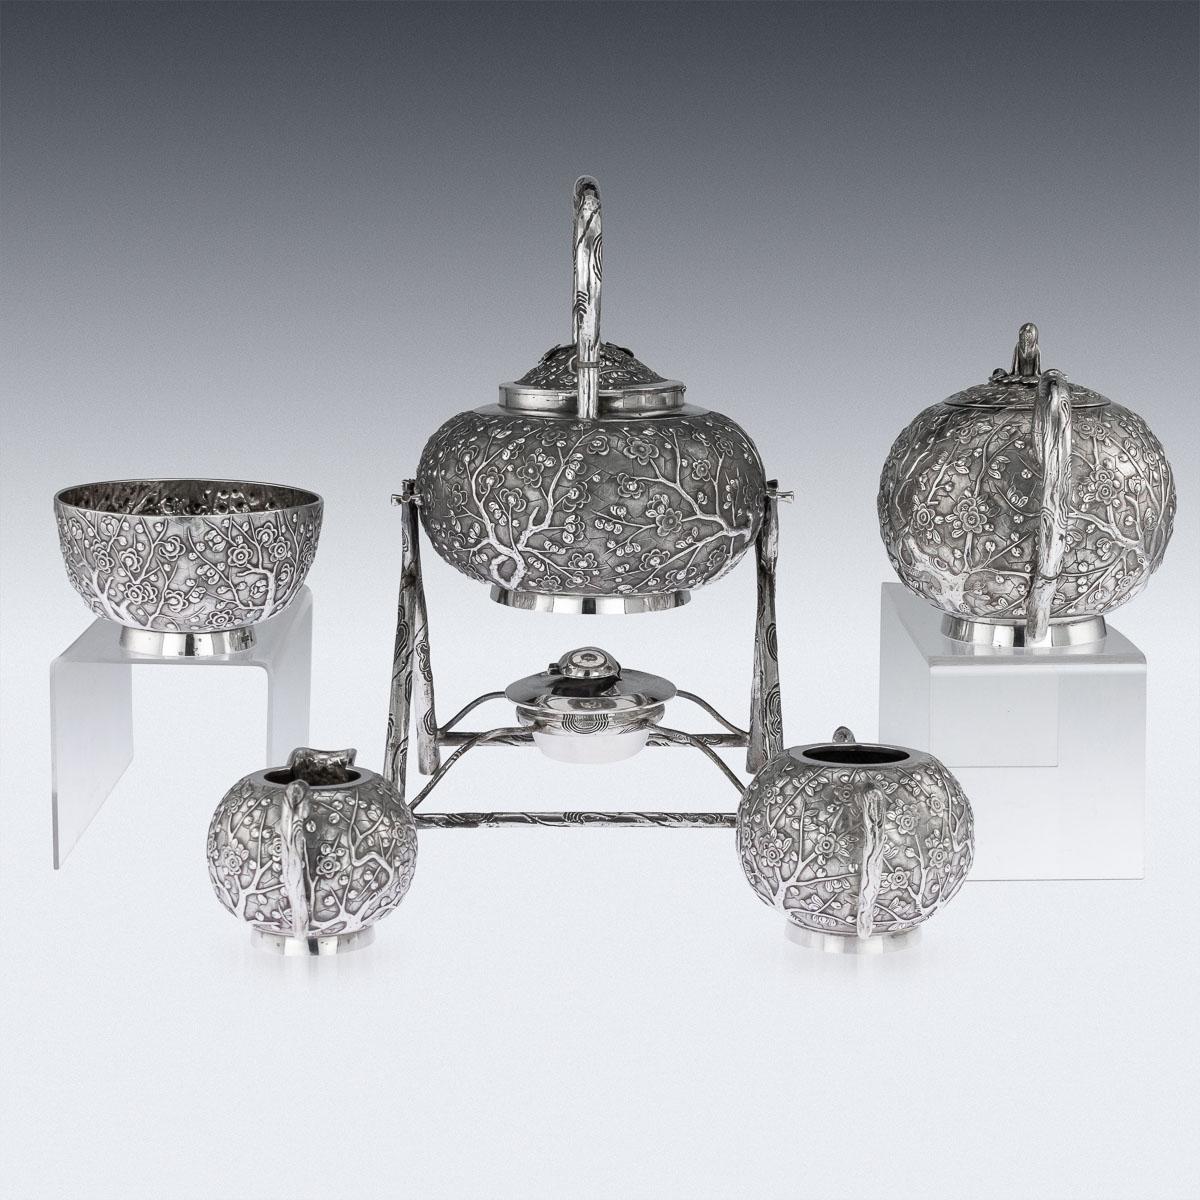 Antique 19th century Chinese export solid silver tea service, impressive and exceptionally fine quality, consisting of a hot water kettle on stand, teapot, waist bowl, sugar bowl and cream jug. The set is ball-shaped, decorated with repoussé prunus